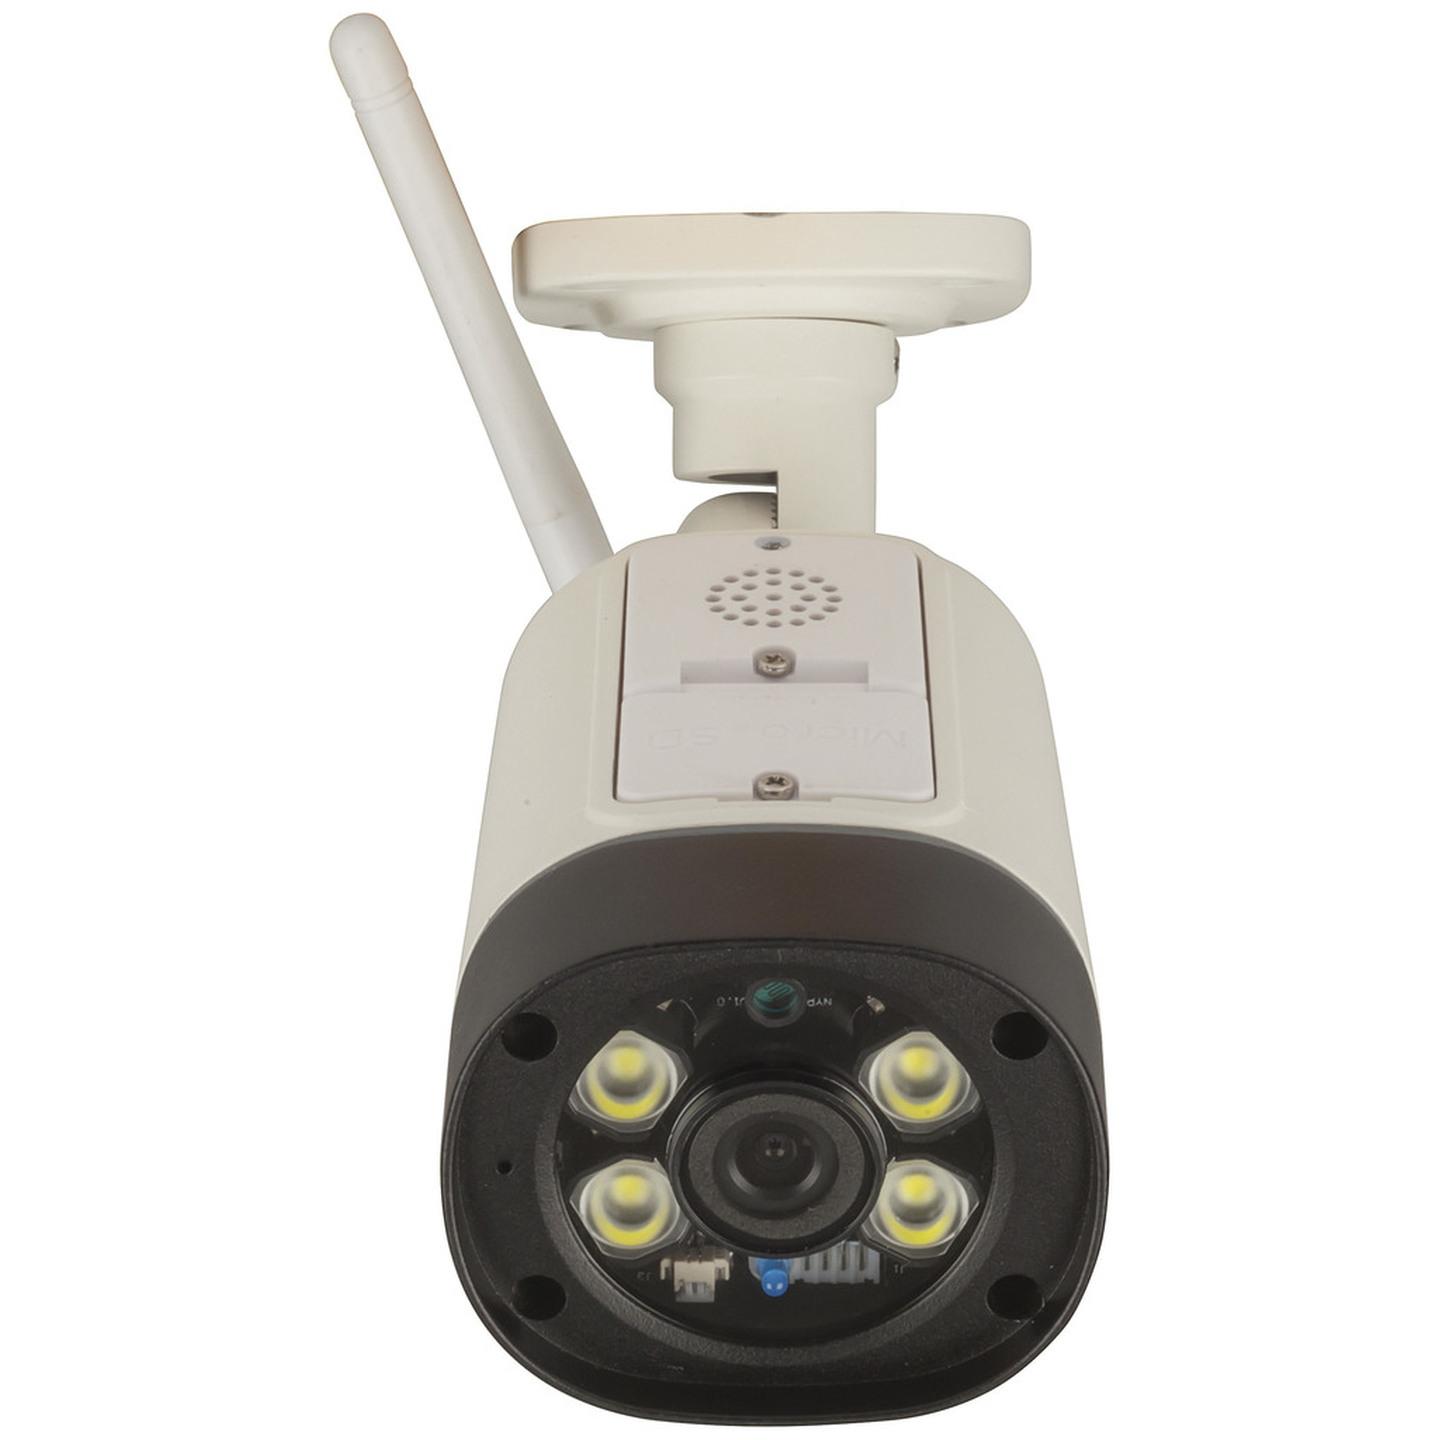 1080p Wireless IP Camera withLED Spotlights